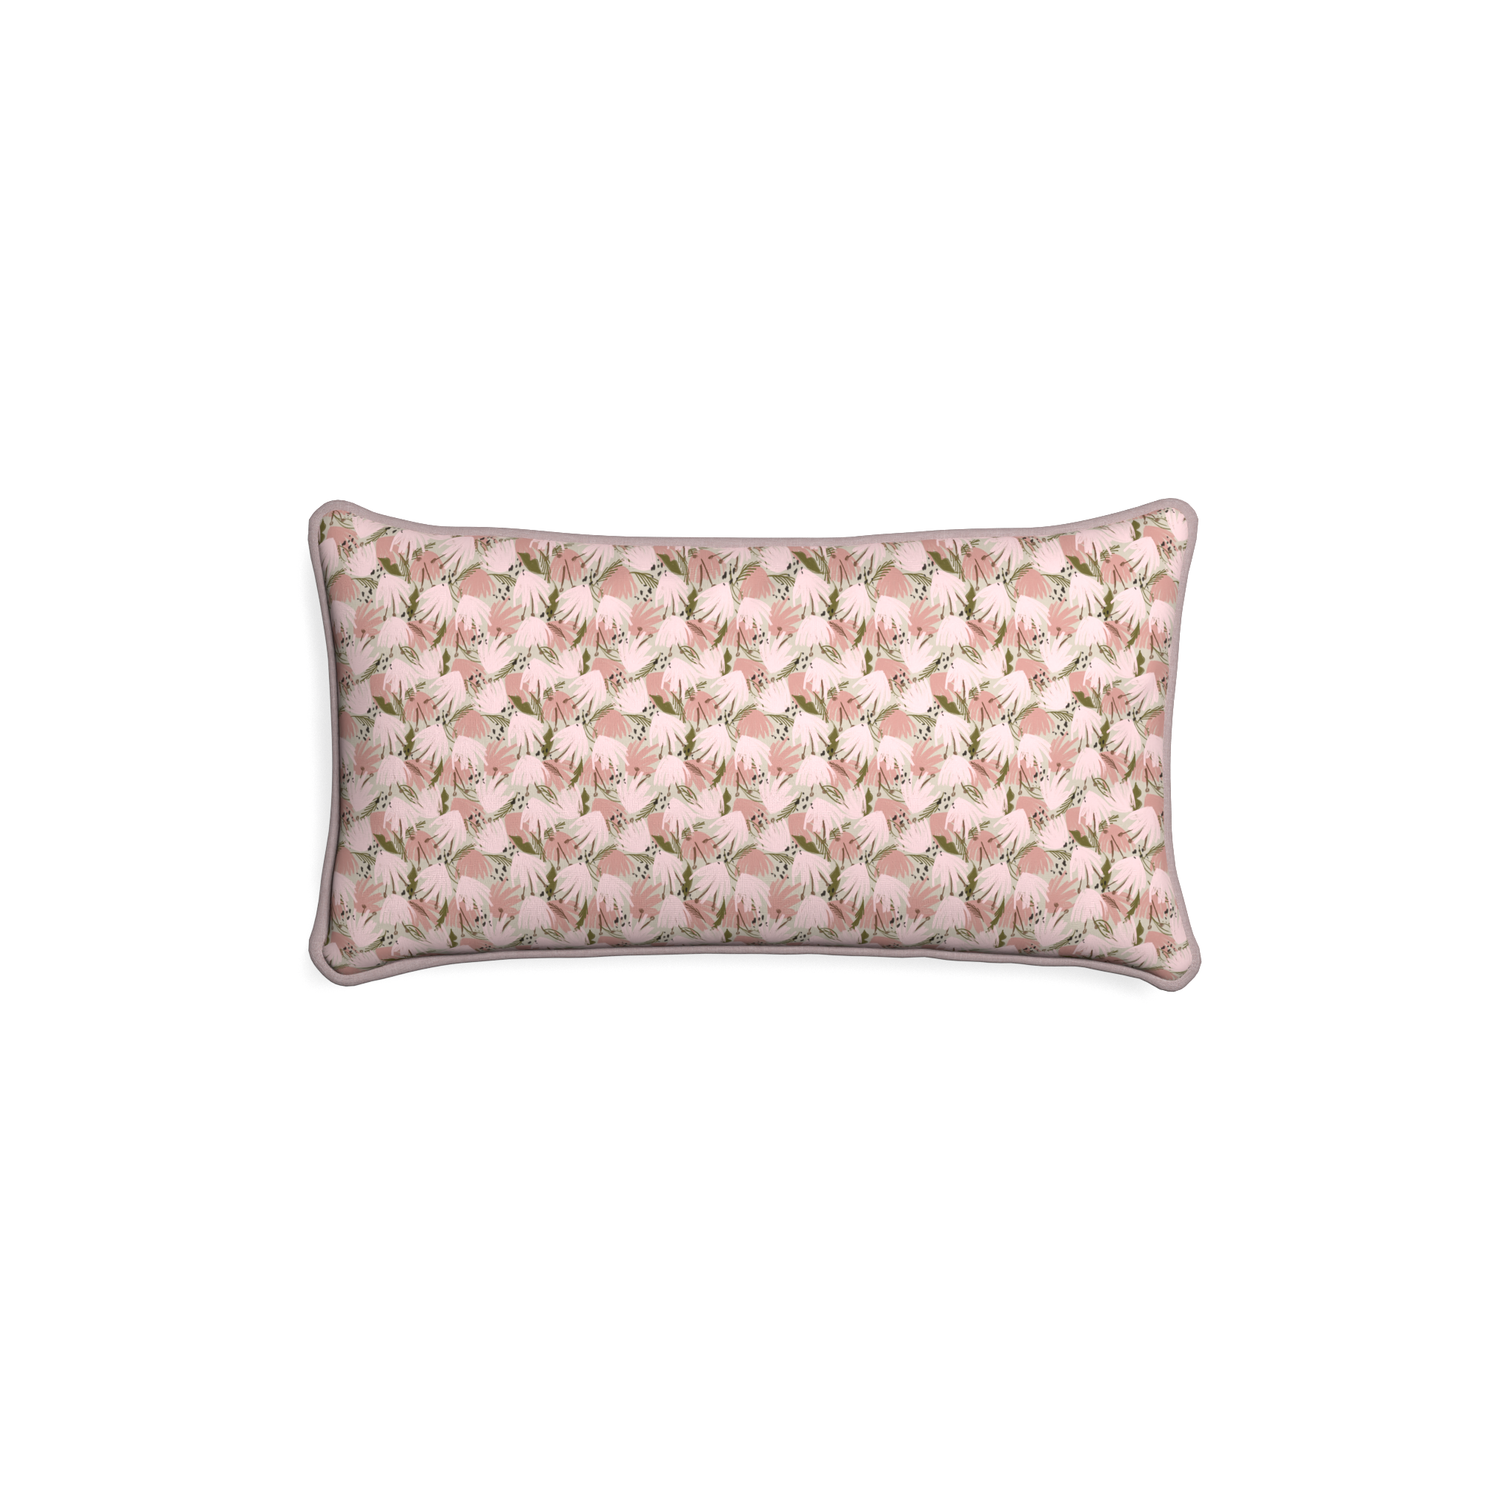 Petite-lumbar eden pink custom pink floralpillow with orchid piping on white background